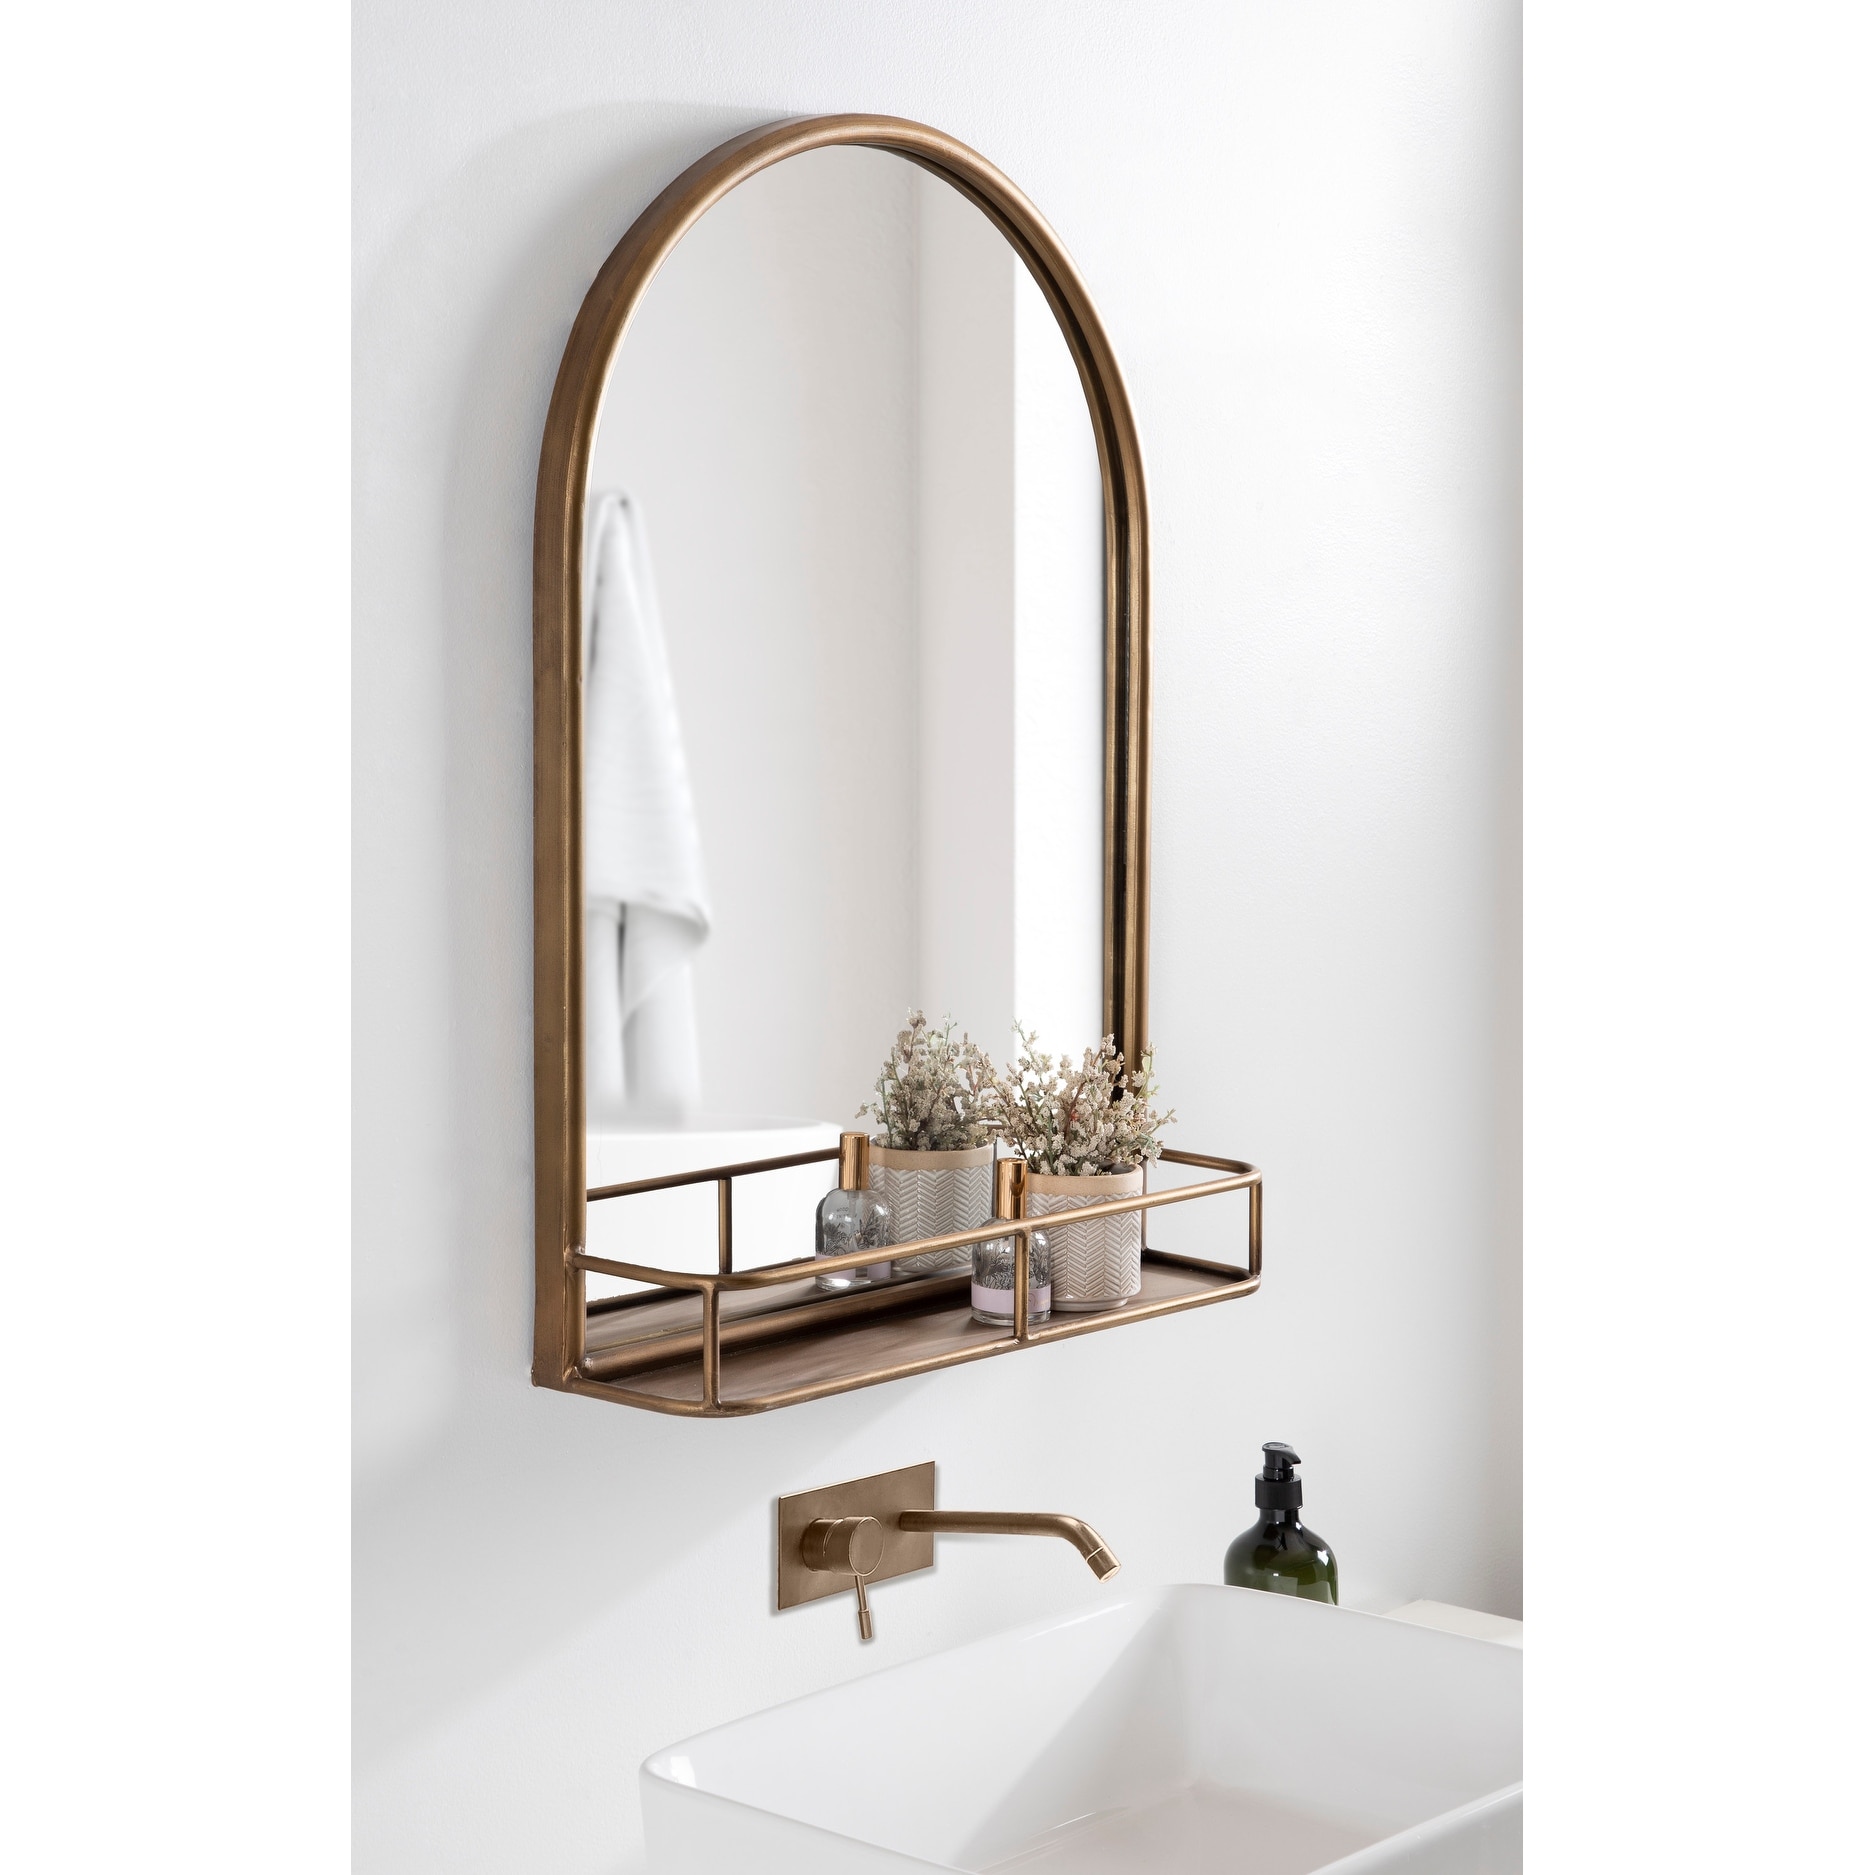 Details about   Arched Wall Mirror With Shelf Metal Frame for Living Room Bedroom Bathroom 